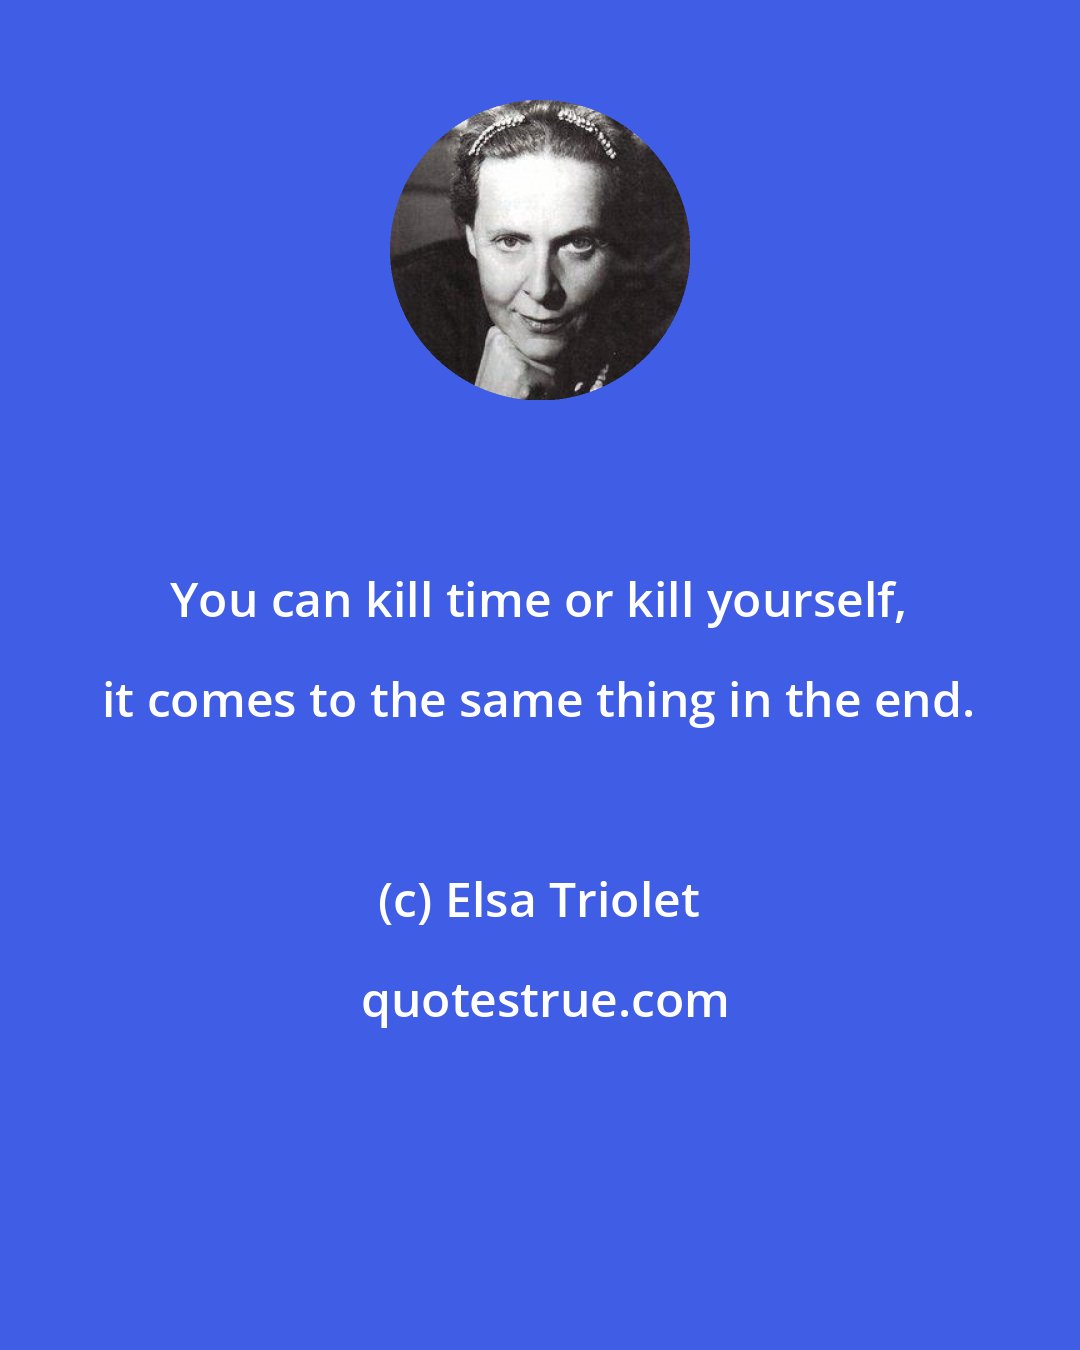 Elsa Triolet: You can kill time or kill yourself, it comes to the same thing in the end.